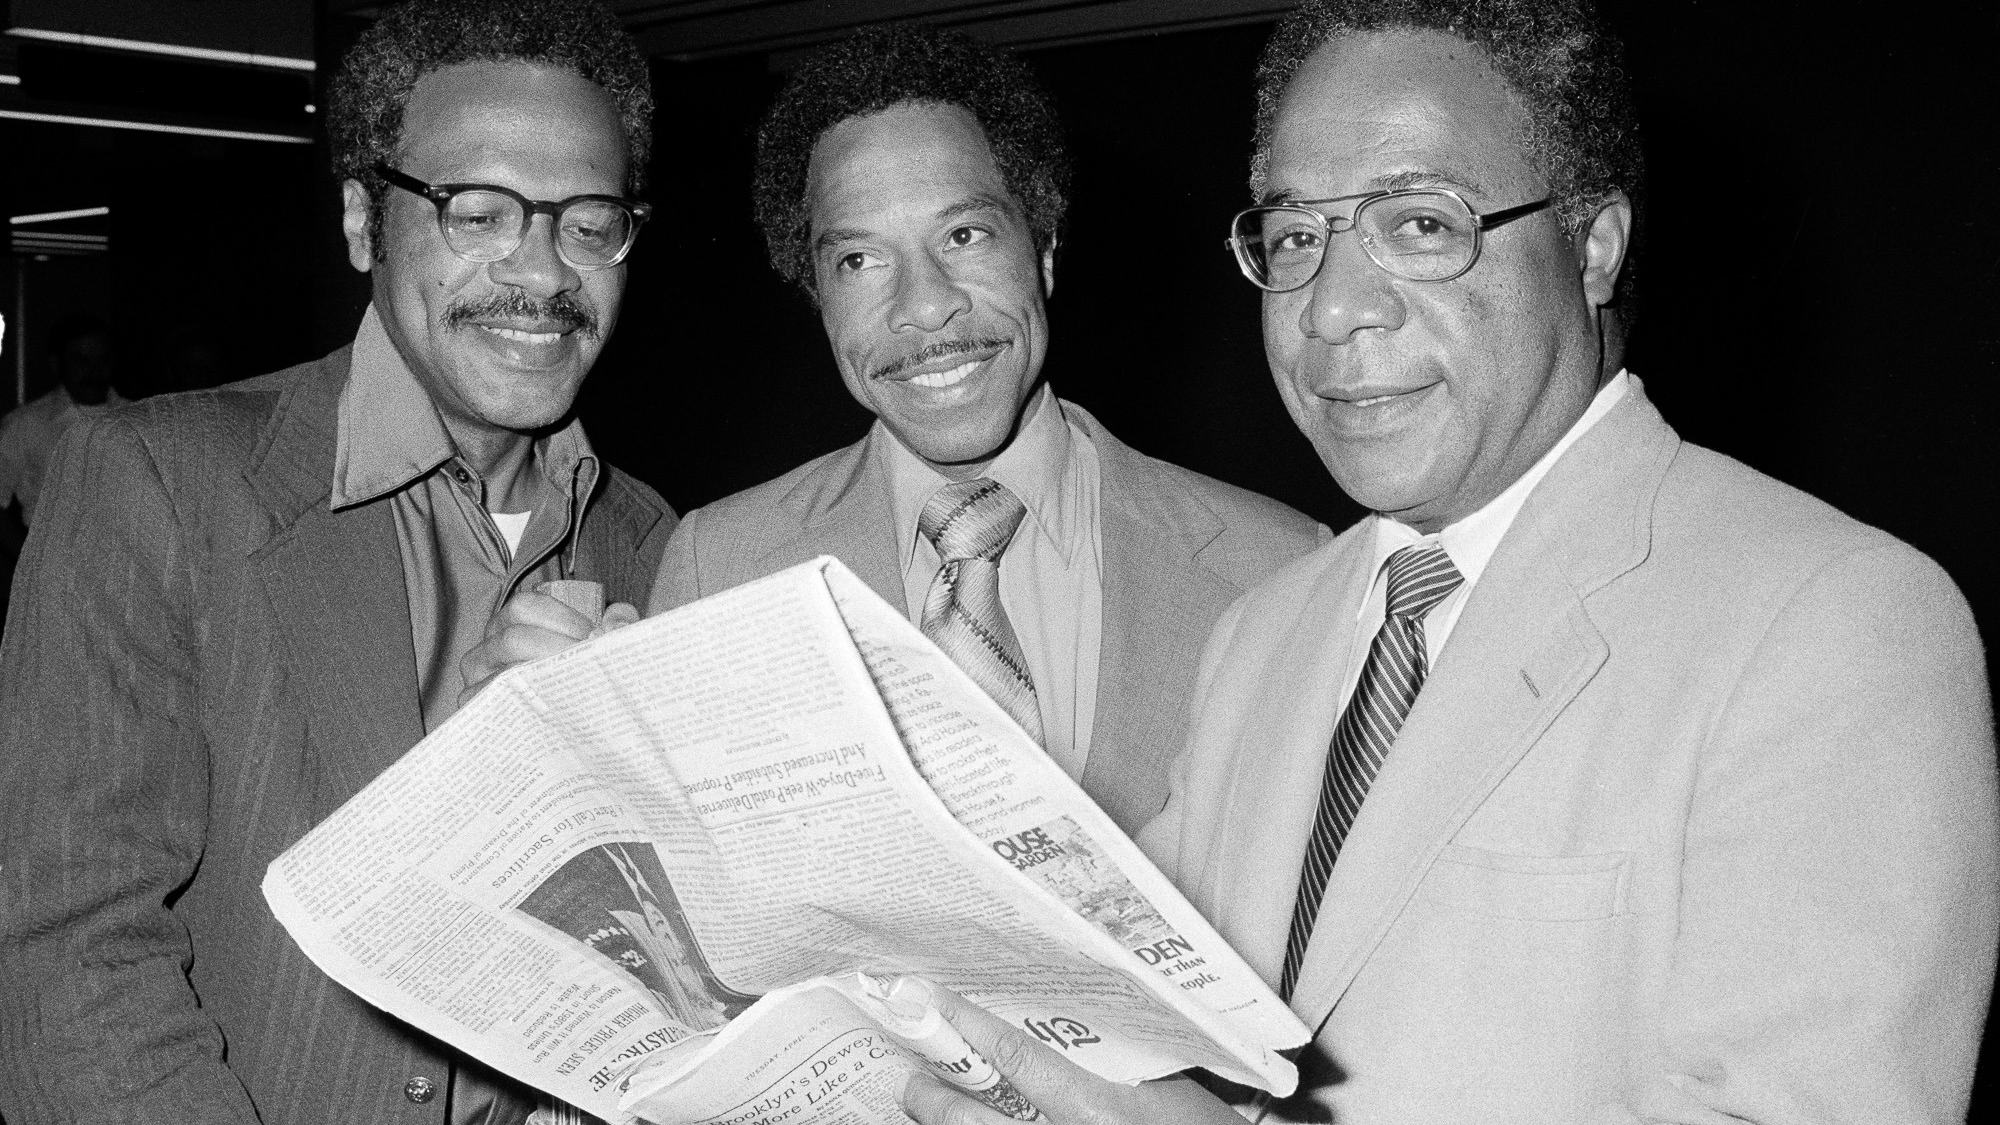 Author Alex Haley, right, poses with his brothers Julius, left, and George, at John F. Kennedy Airport in New York, April 19, 1977, after their return from the African village of Juffre in Gambia, where Alex had traced an ancestor for his book "Roots." Haley was surprised by an article in the newspaper he's holding claiming that he was awarded a special Pulitzer Prize for his best-selling book. (AP Photo/Ira Schwarz)